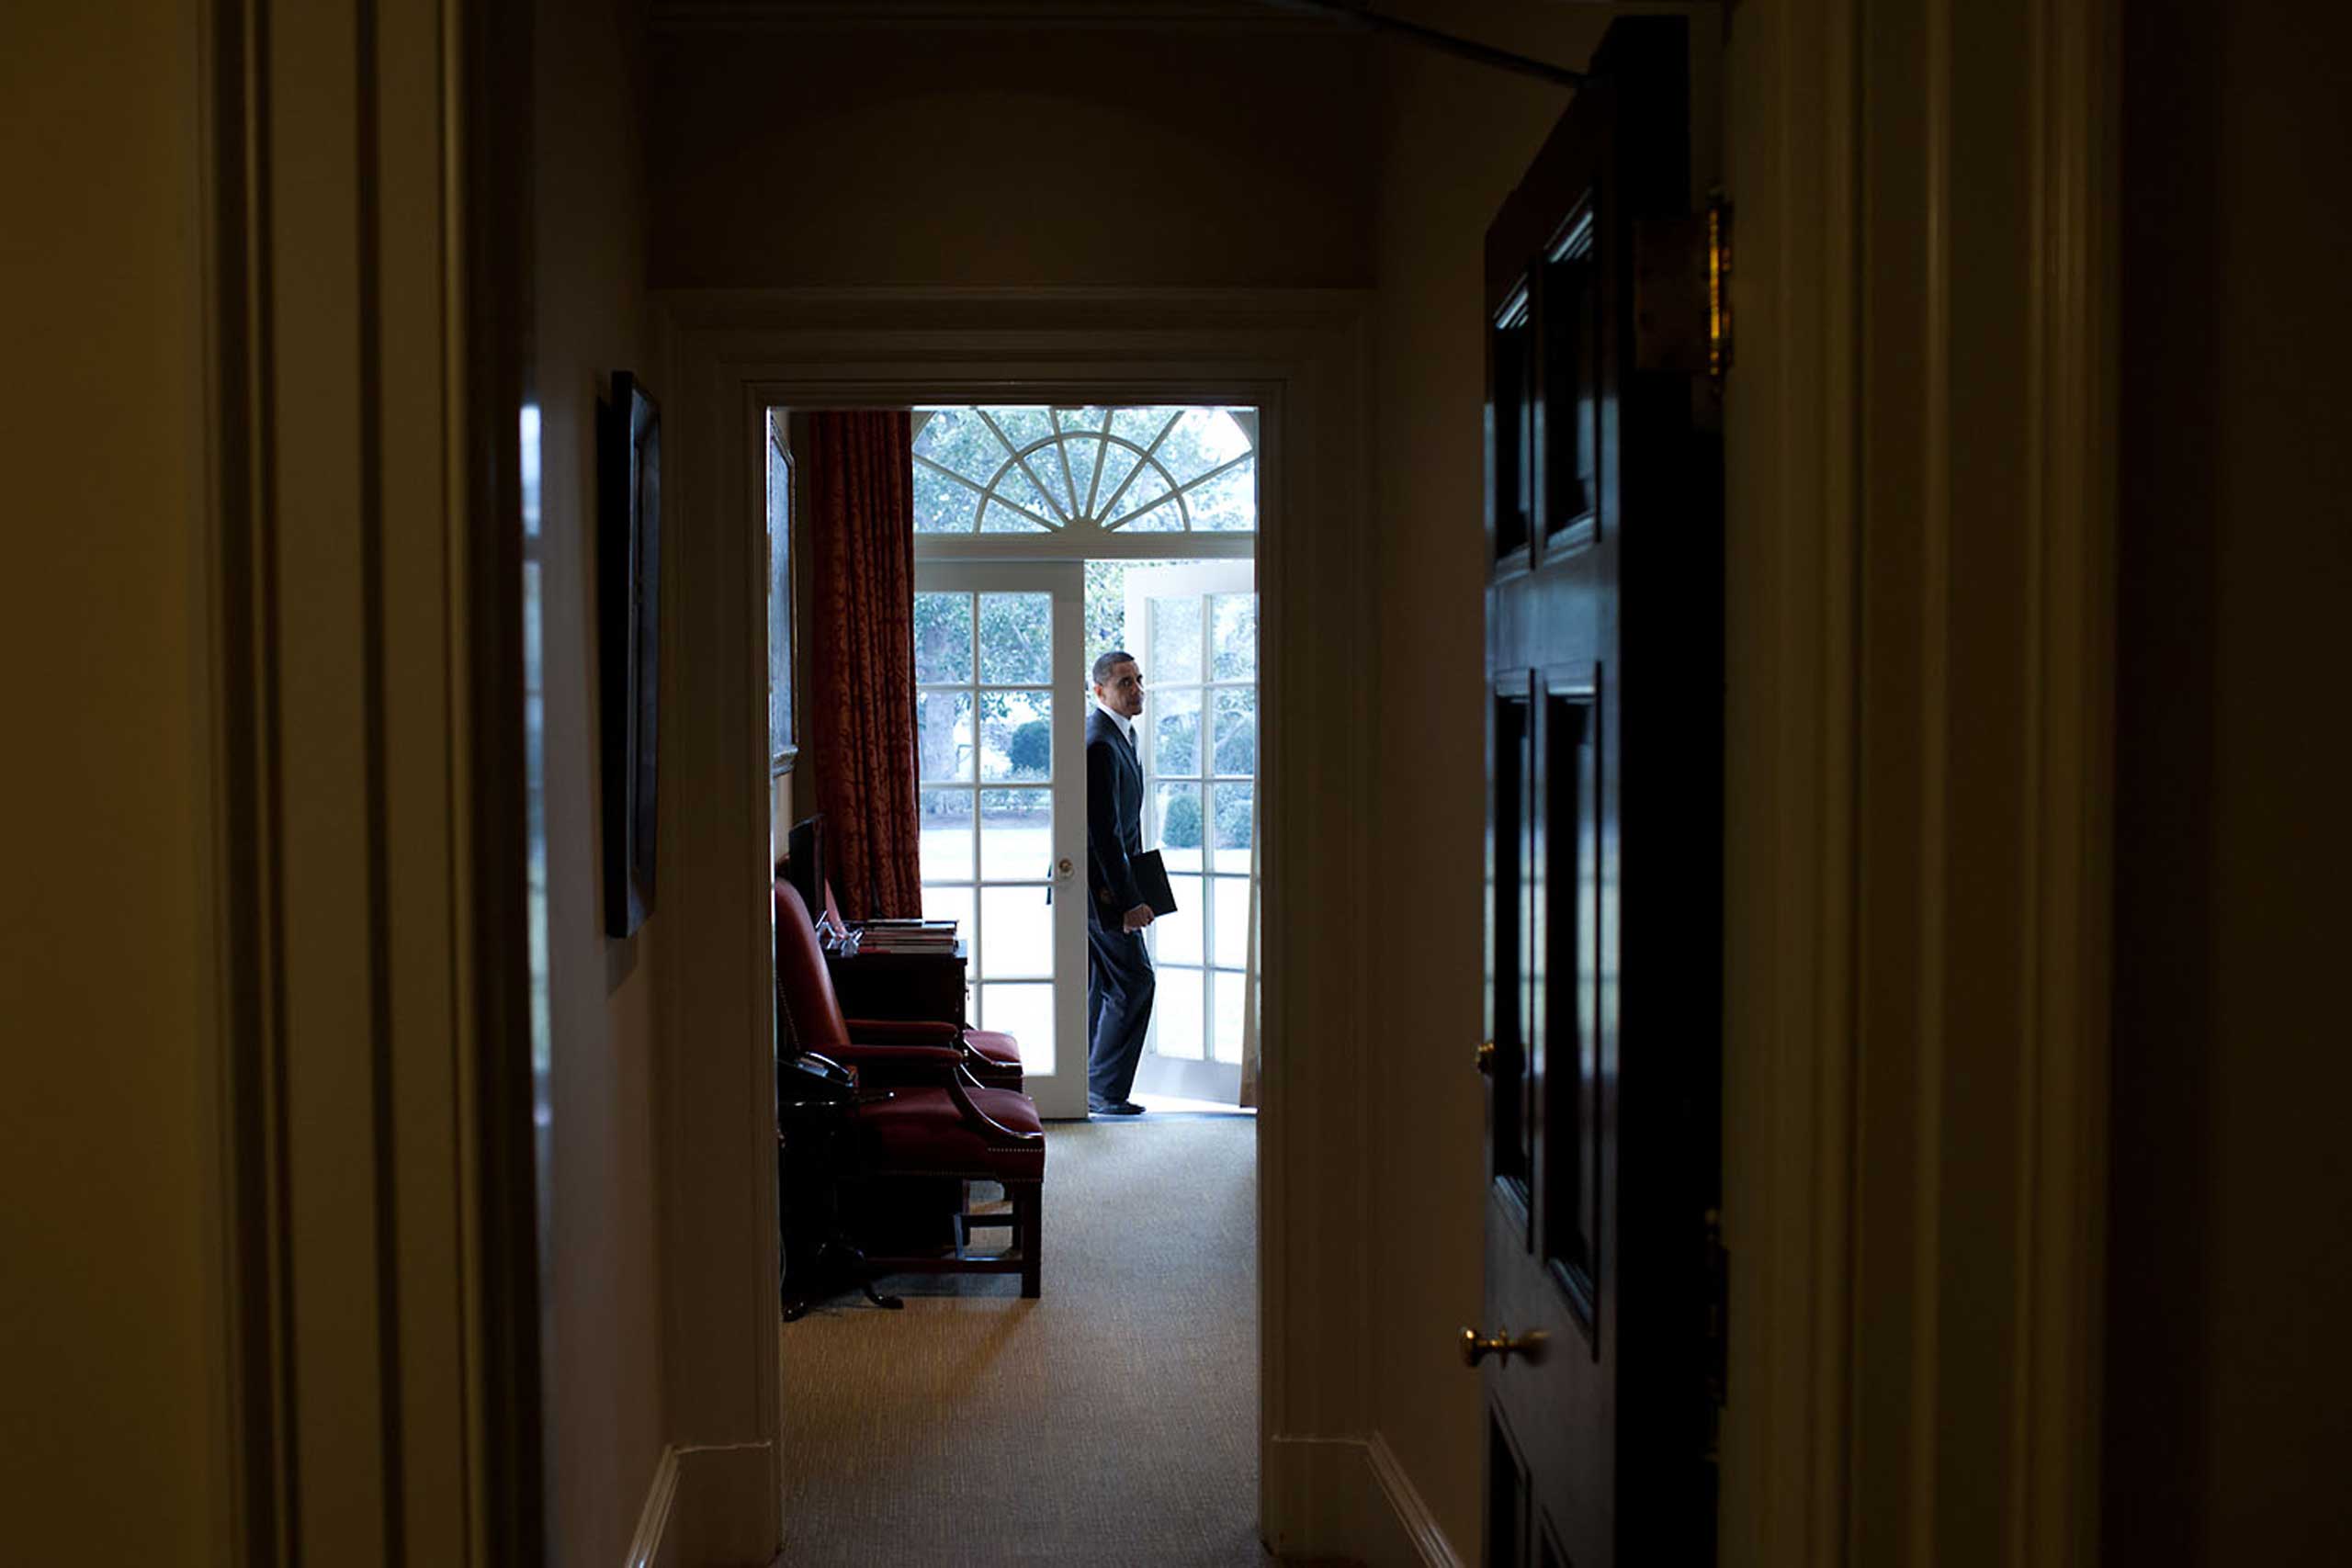 President Obama walks through the door of the Outer Oval Office at the start of the day, Feb. 24, 2011. This is his usual point of entry to the Oval Office each morning.